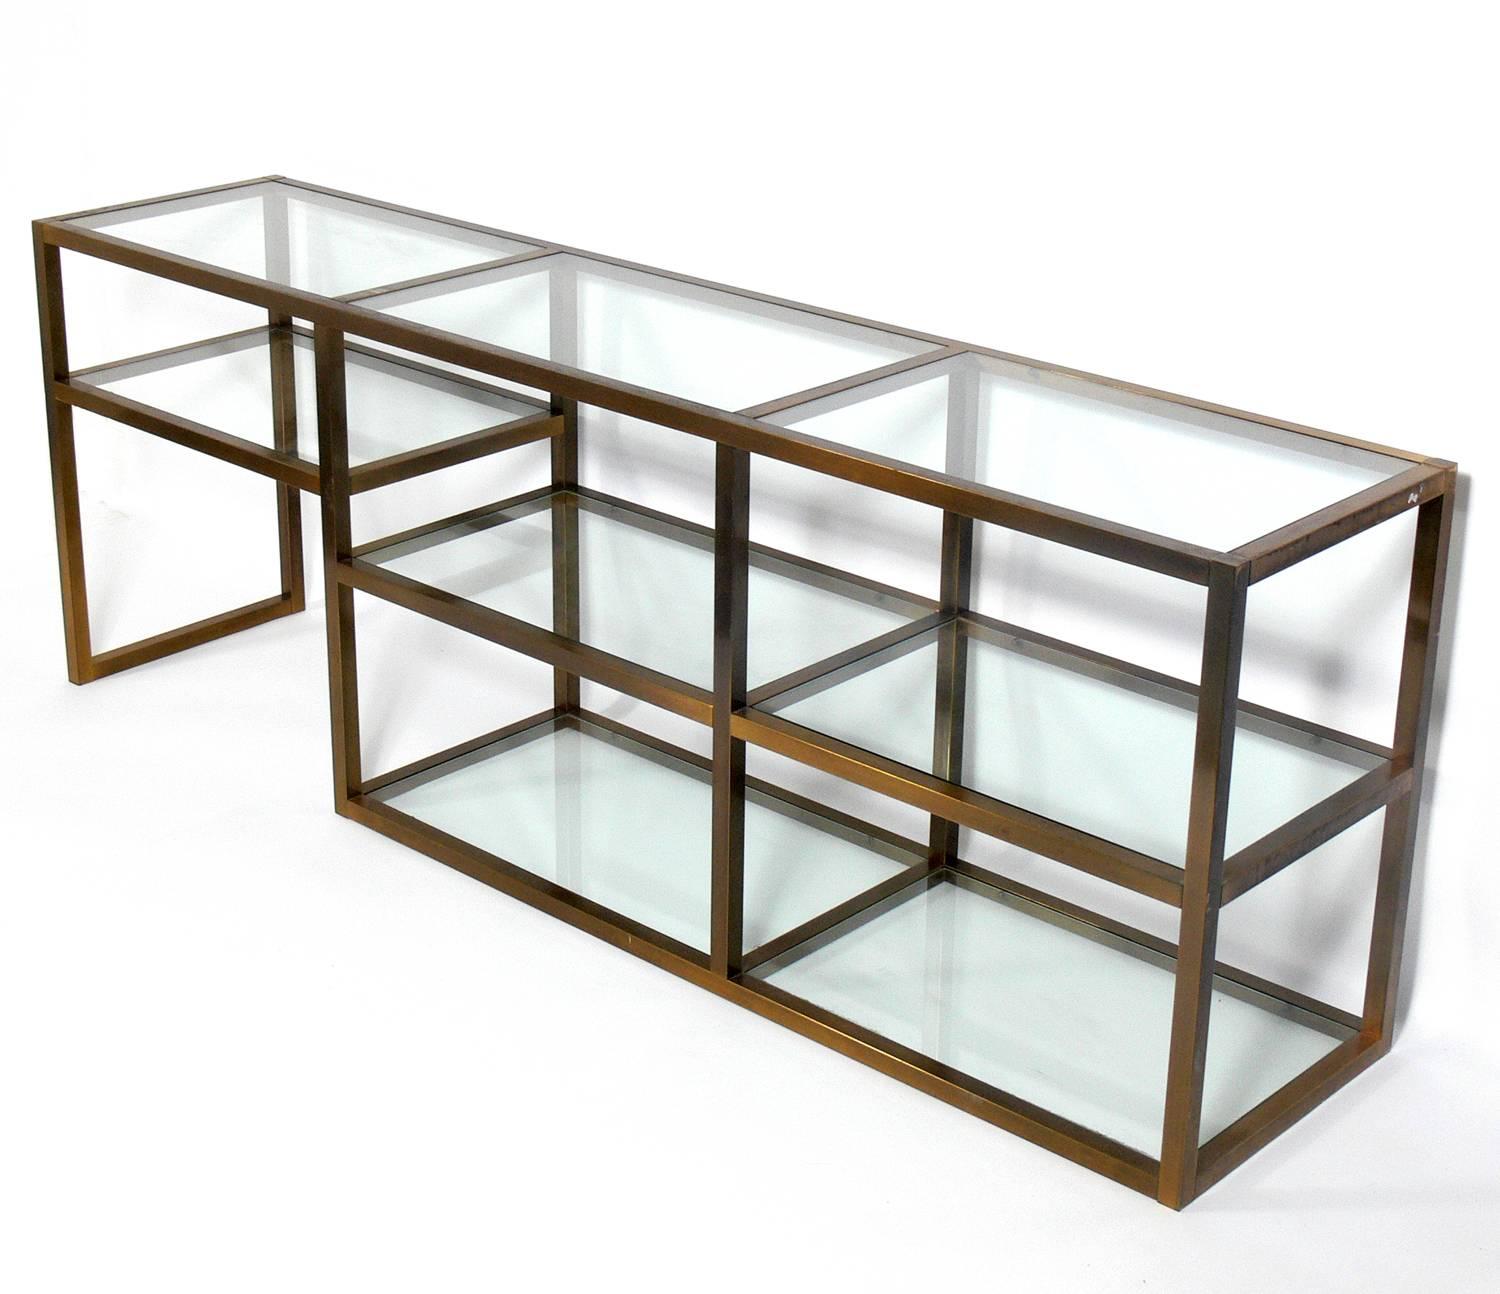 Clean lined brass and glass bookshelf or vitrine, American, circa 1960s. This piece is a versatile size and can be used as a bookshelf, vitrine, display case, bar, or media cabinet. Retains warm original patina to brass and brass plated metal.